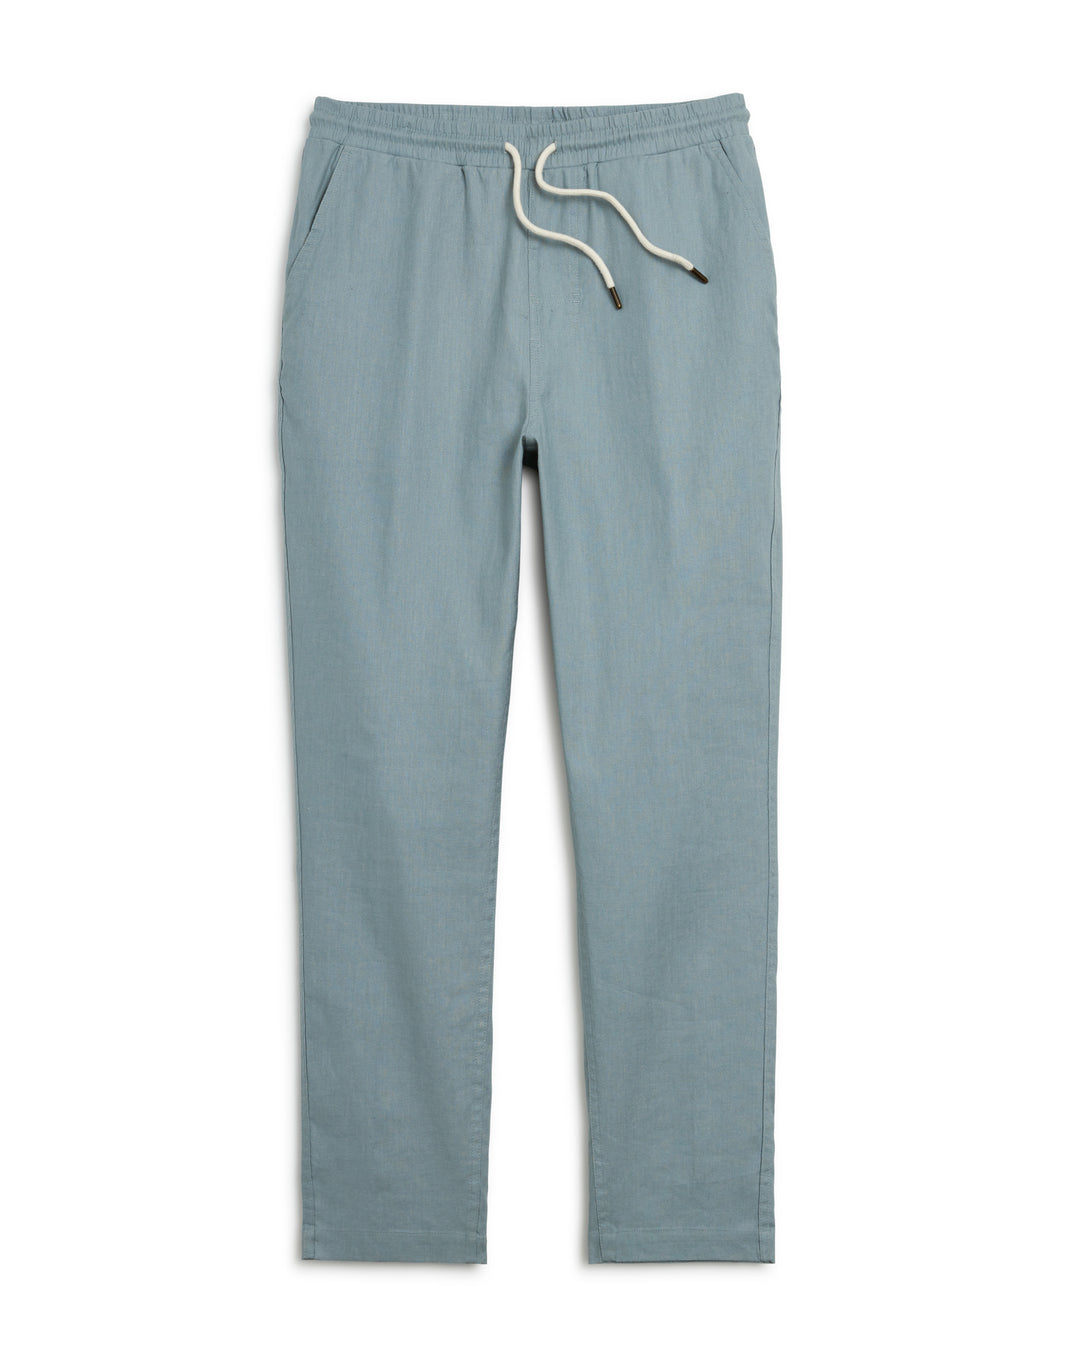 A men's Dandy Del Mar Brisa Linen Pant - Abalone, with a drawstring, featuring an elastic waist for ultimate comfort.